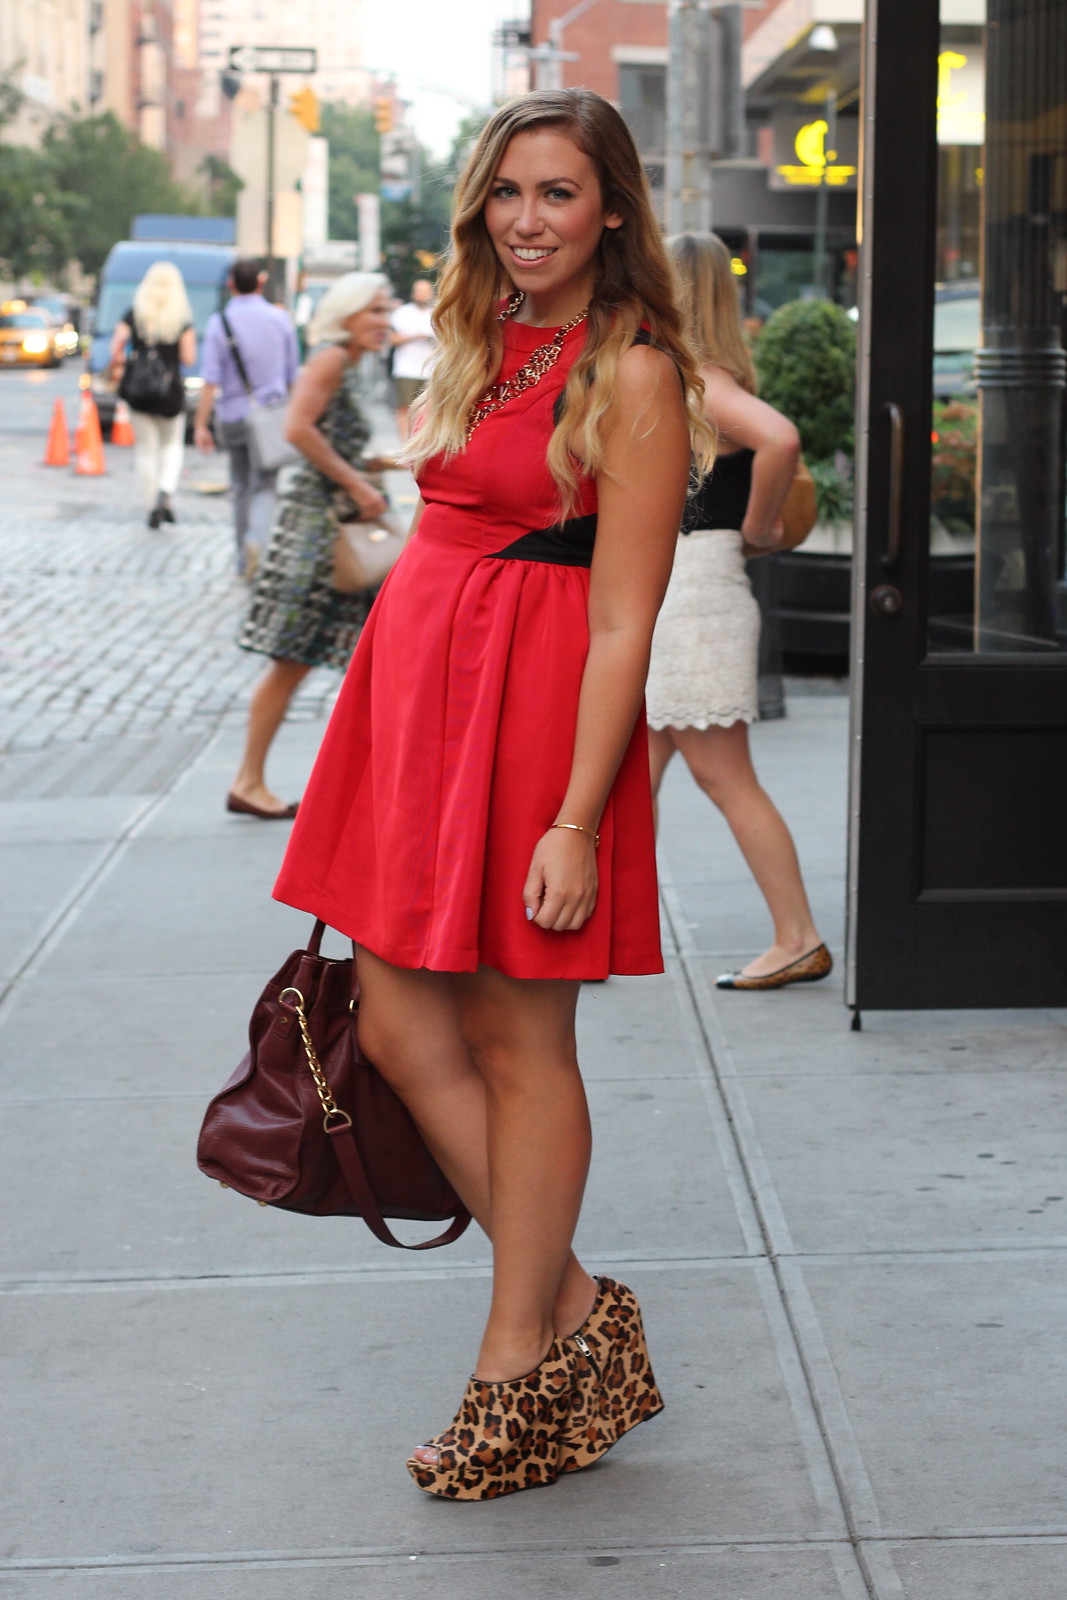 Red Dress | Leopard Platform Booties | A Look Back at 10 Years of Blogging Living After Midnite Blogger Jackie Giardina